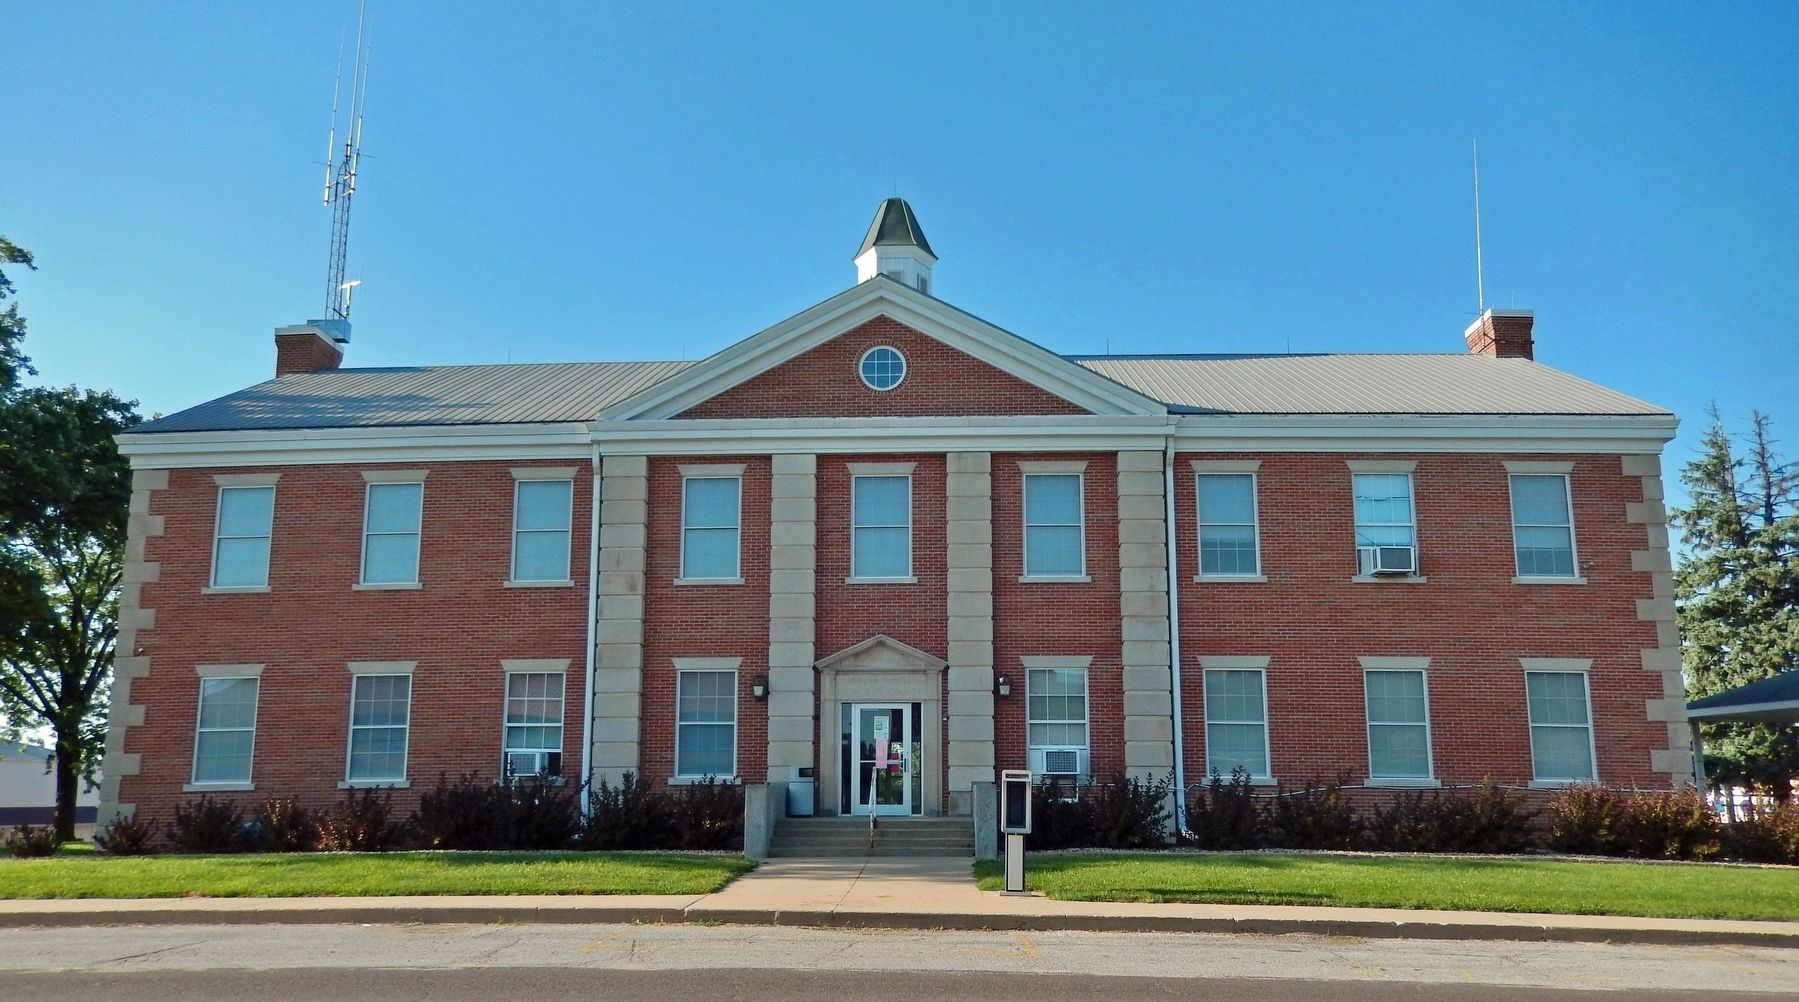 Schuyler County Courthouse (<i>south/front elevation</i>) image. Click for full size.